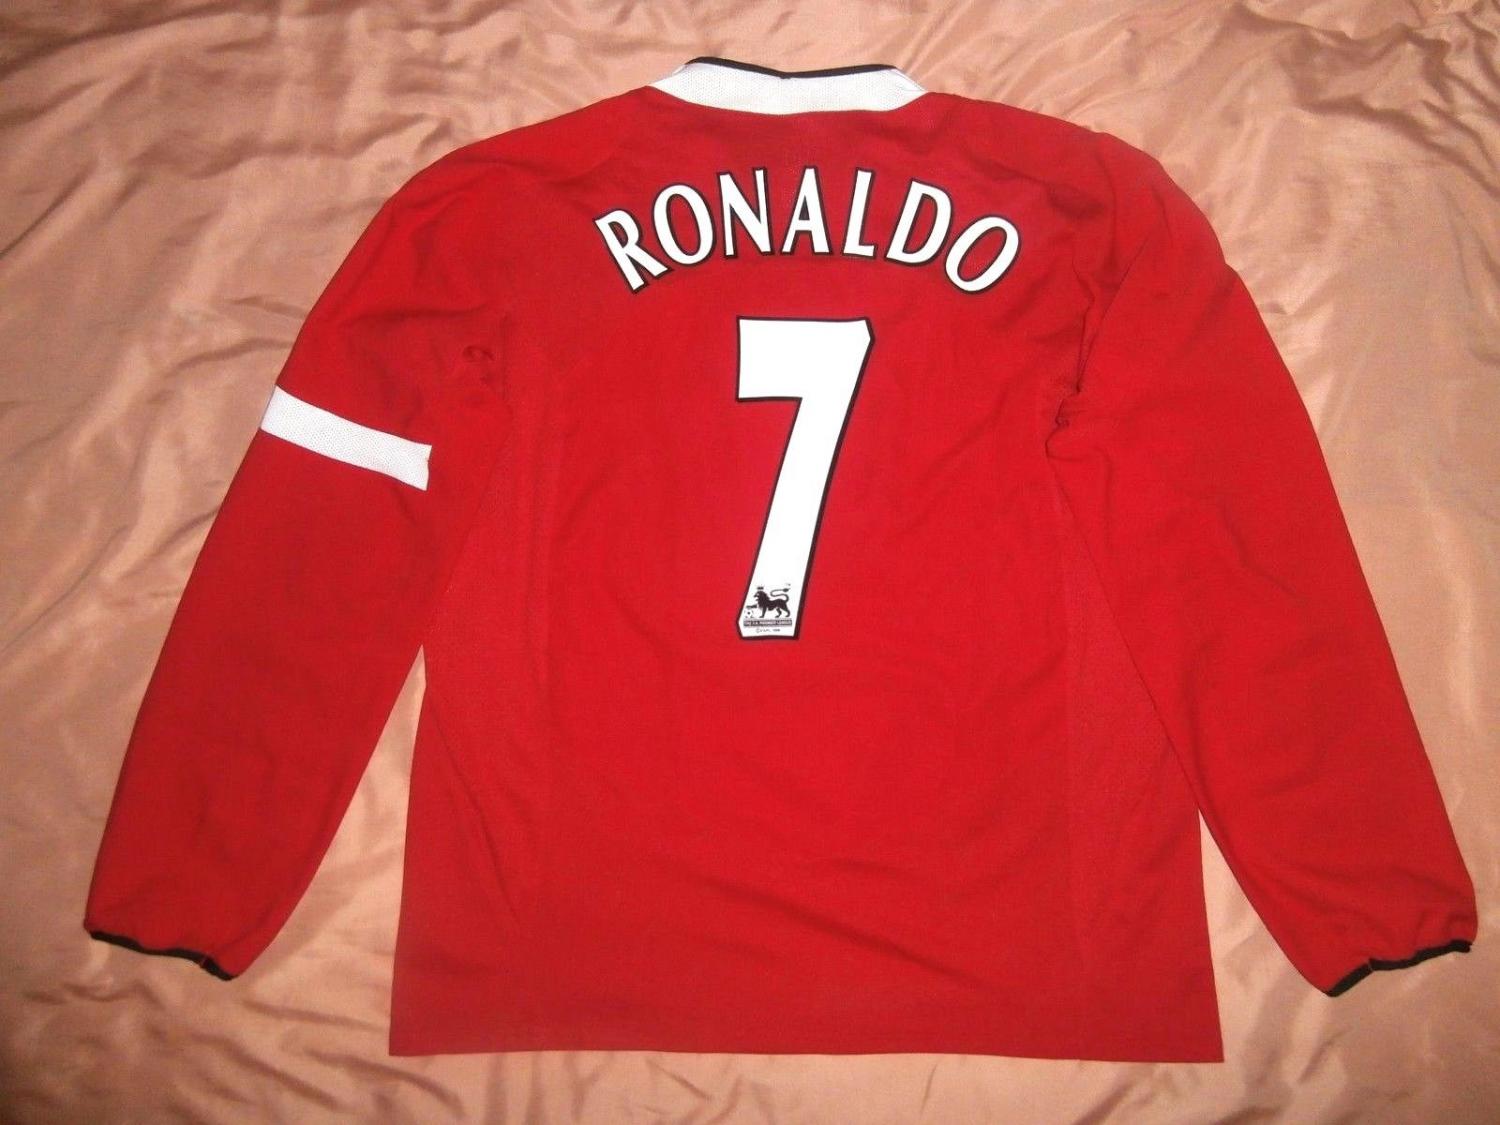 Manchester United Home football shirt 2004 - 2006. Sponsored by Vodafone